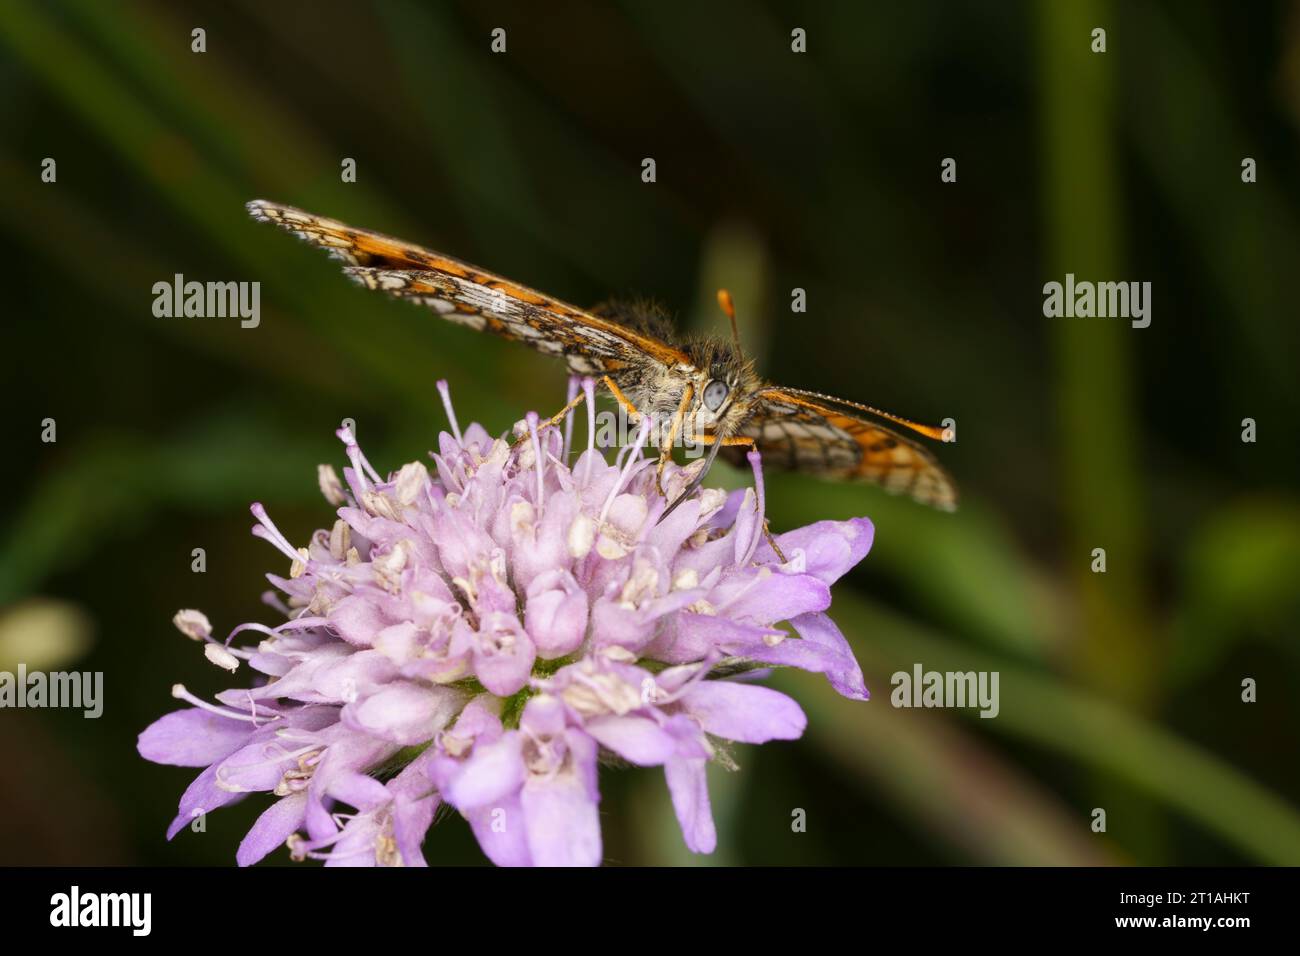 Melitaea athalia Family Nymphalidae Genus Mellicta Heath fritillary butterfly wild nature insect photography, picture, wallpaper Stock Photo